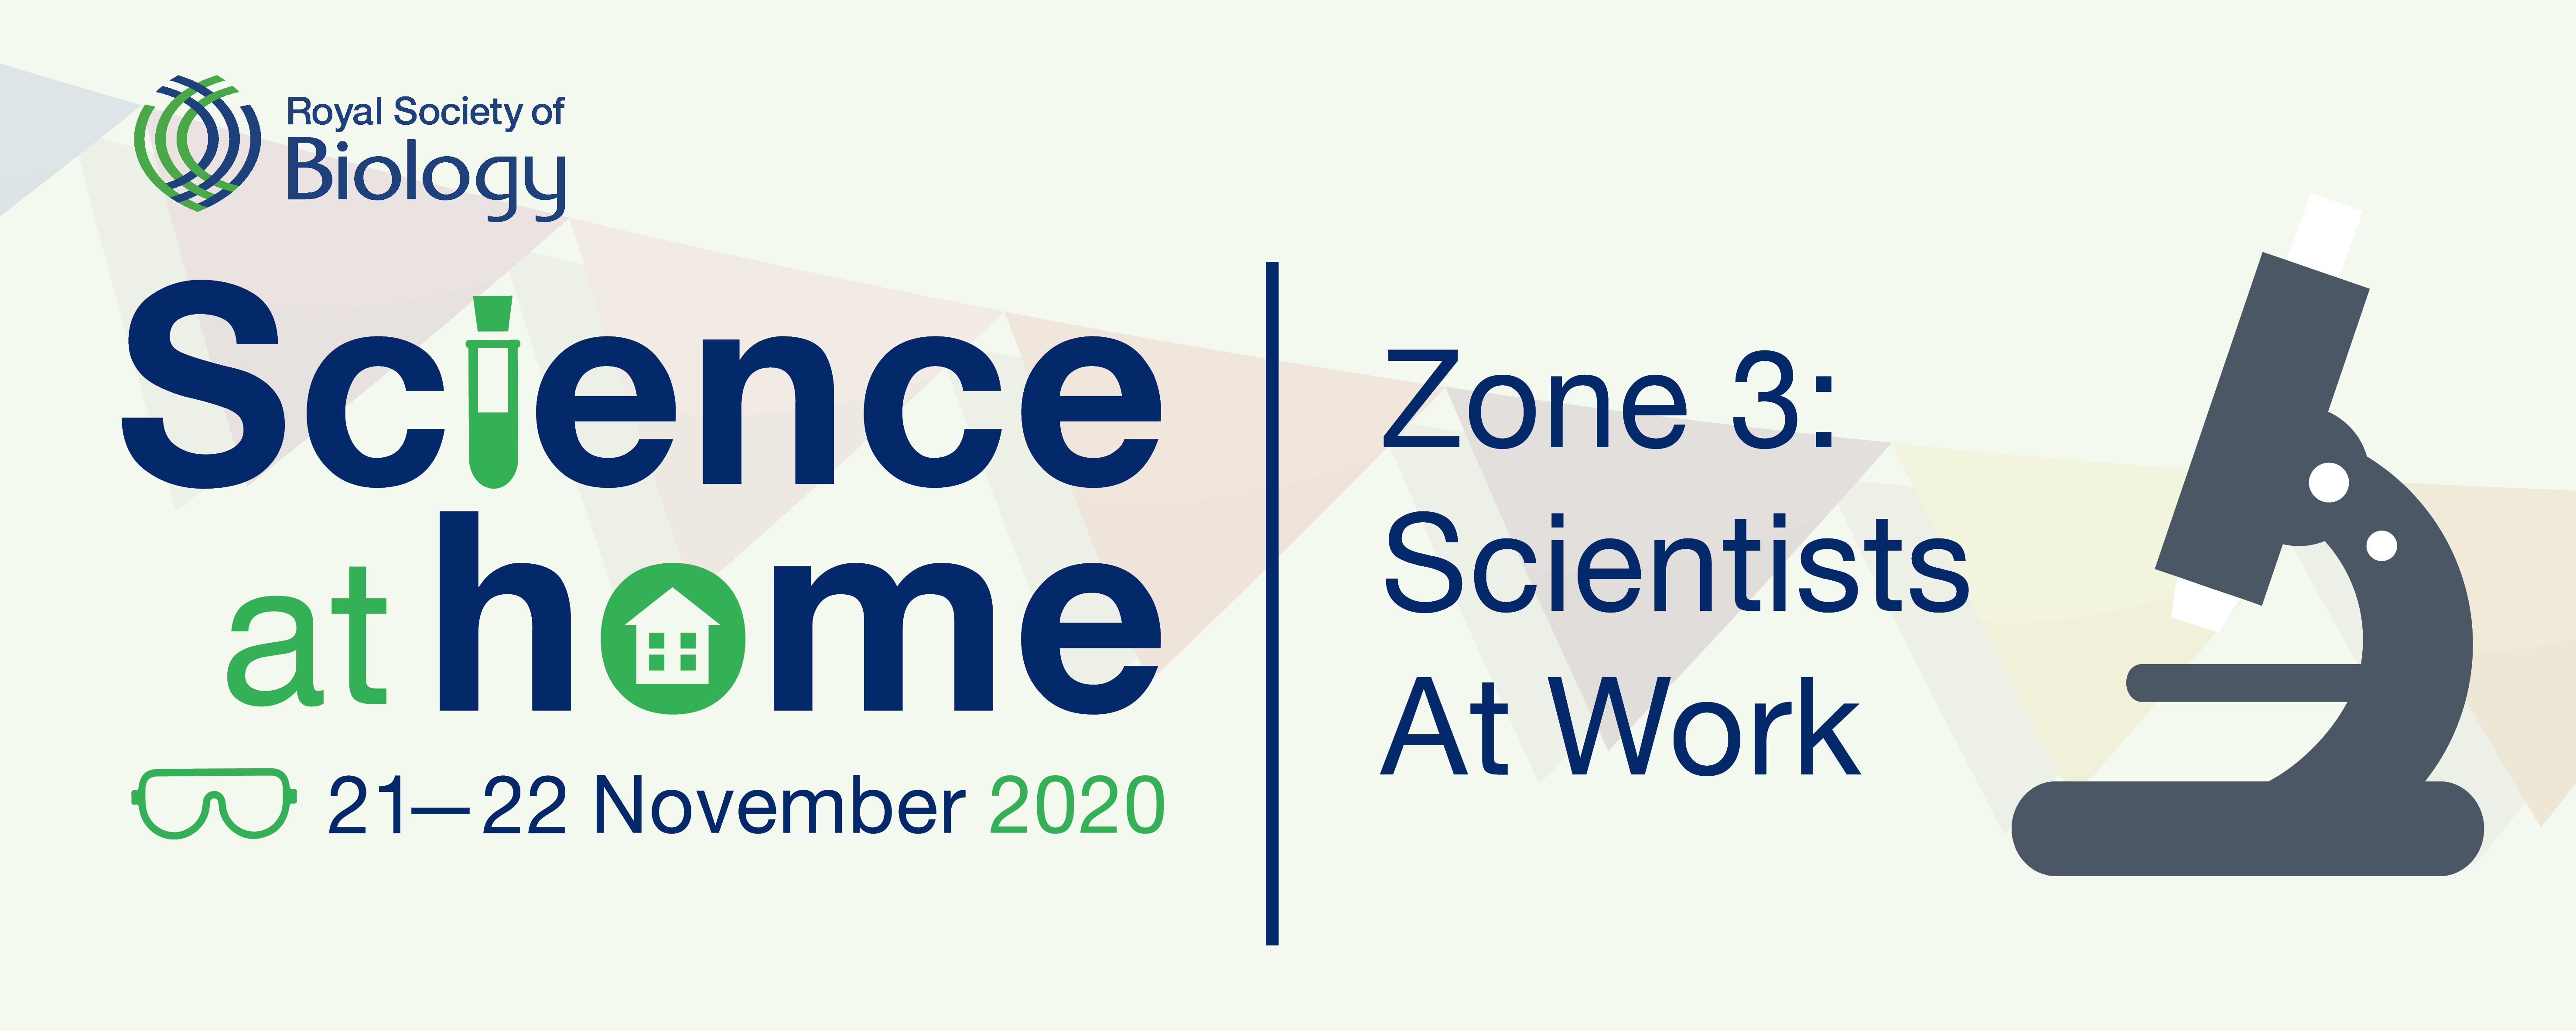 Science at home webpage banner for zone 3